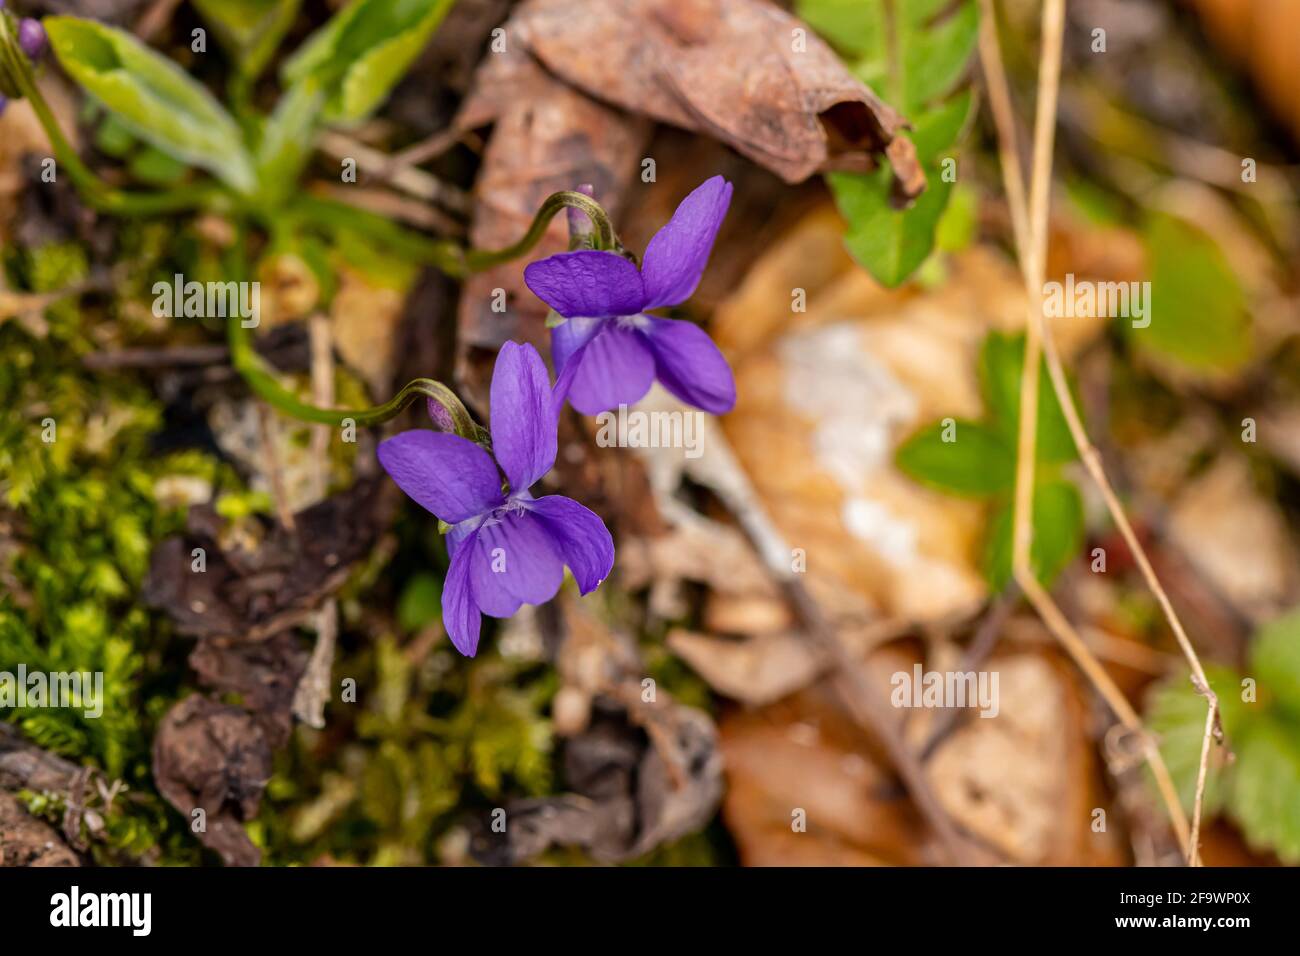 Hairy violet flower in the forest, close up Stock Photo